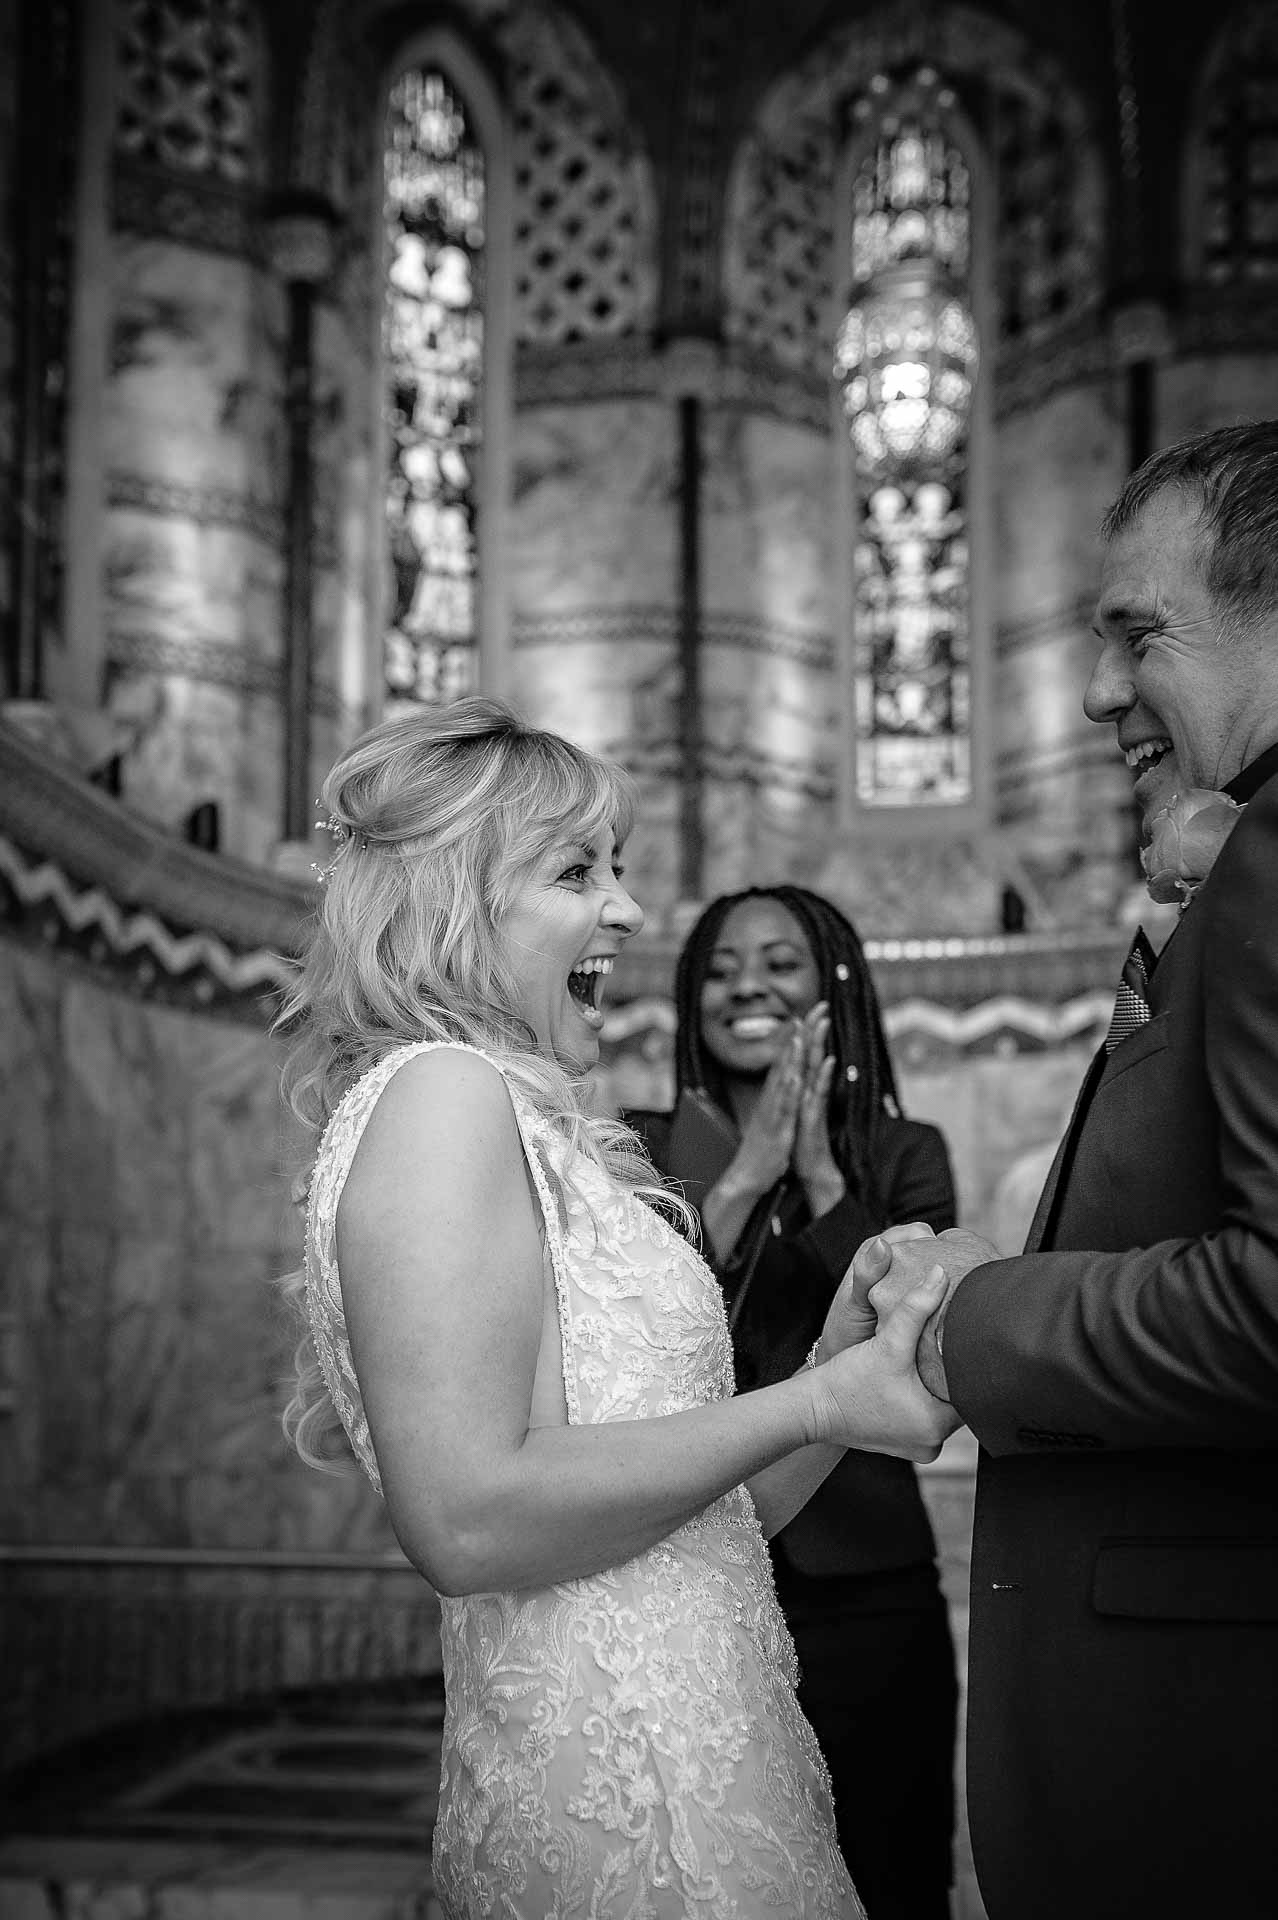 Bride cheering as she is married at Fitzrovia Chapel